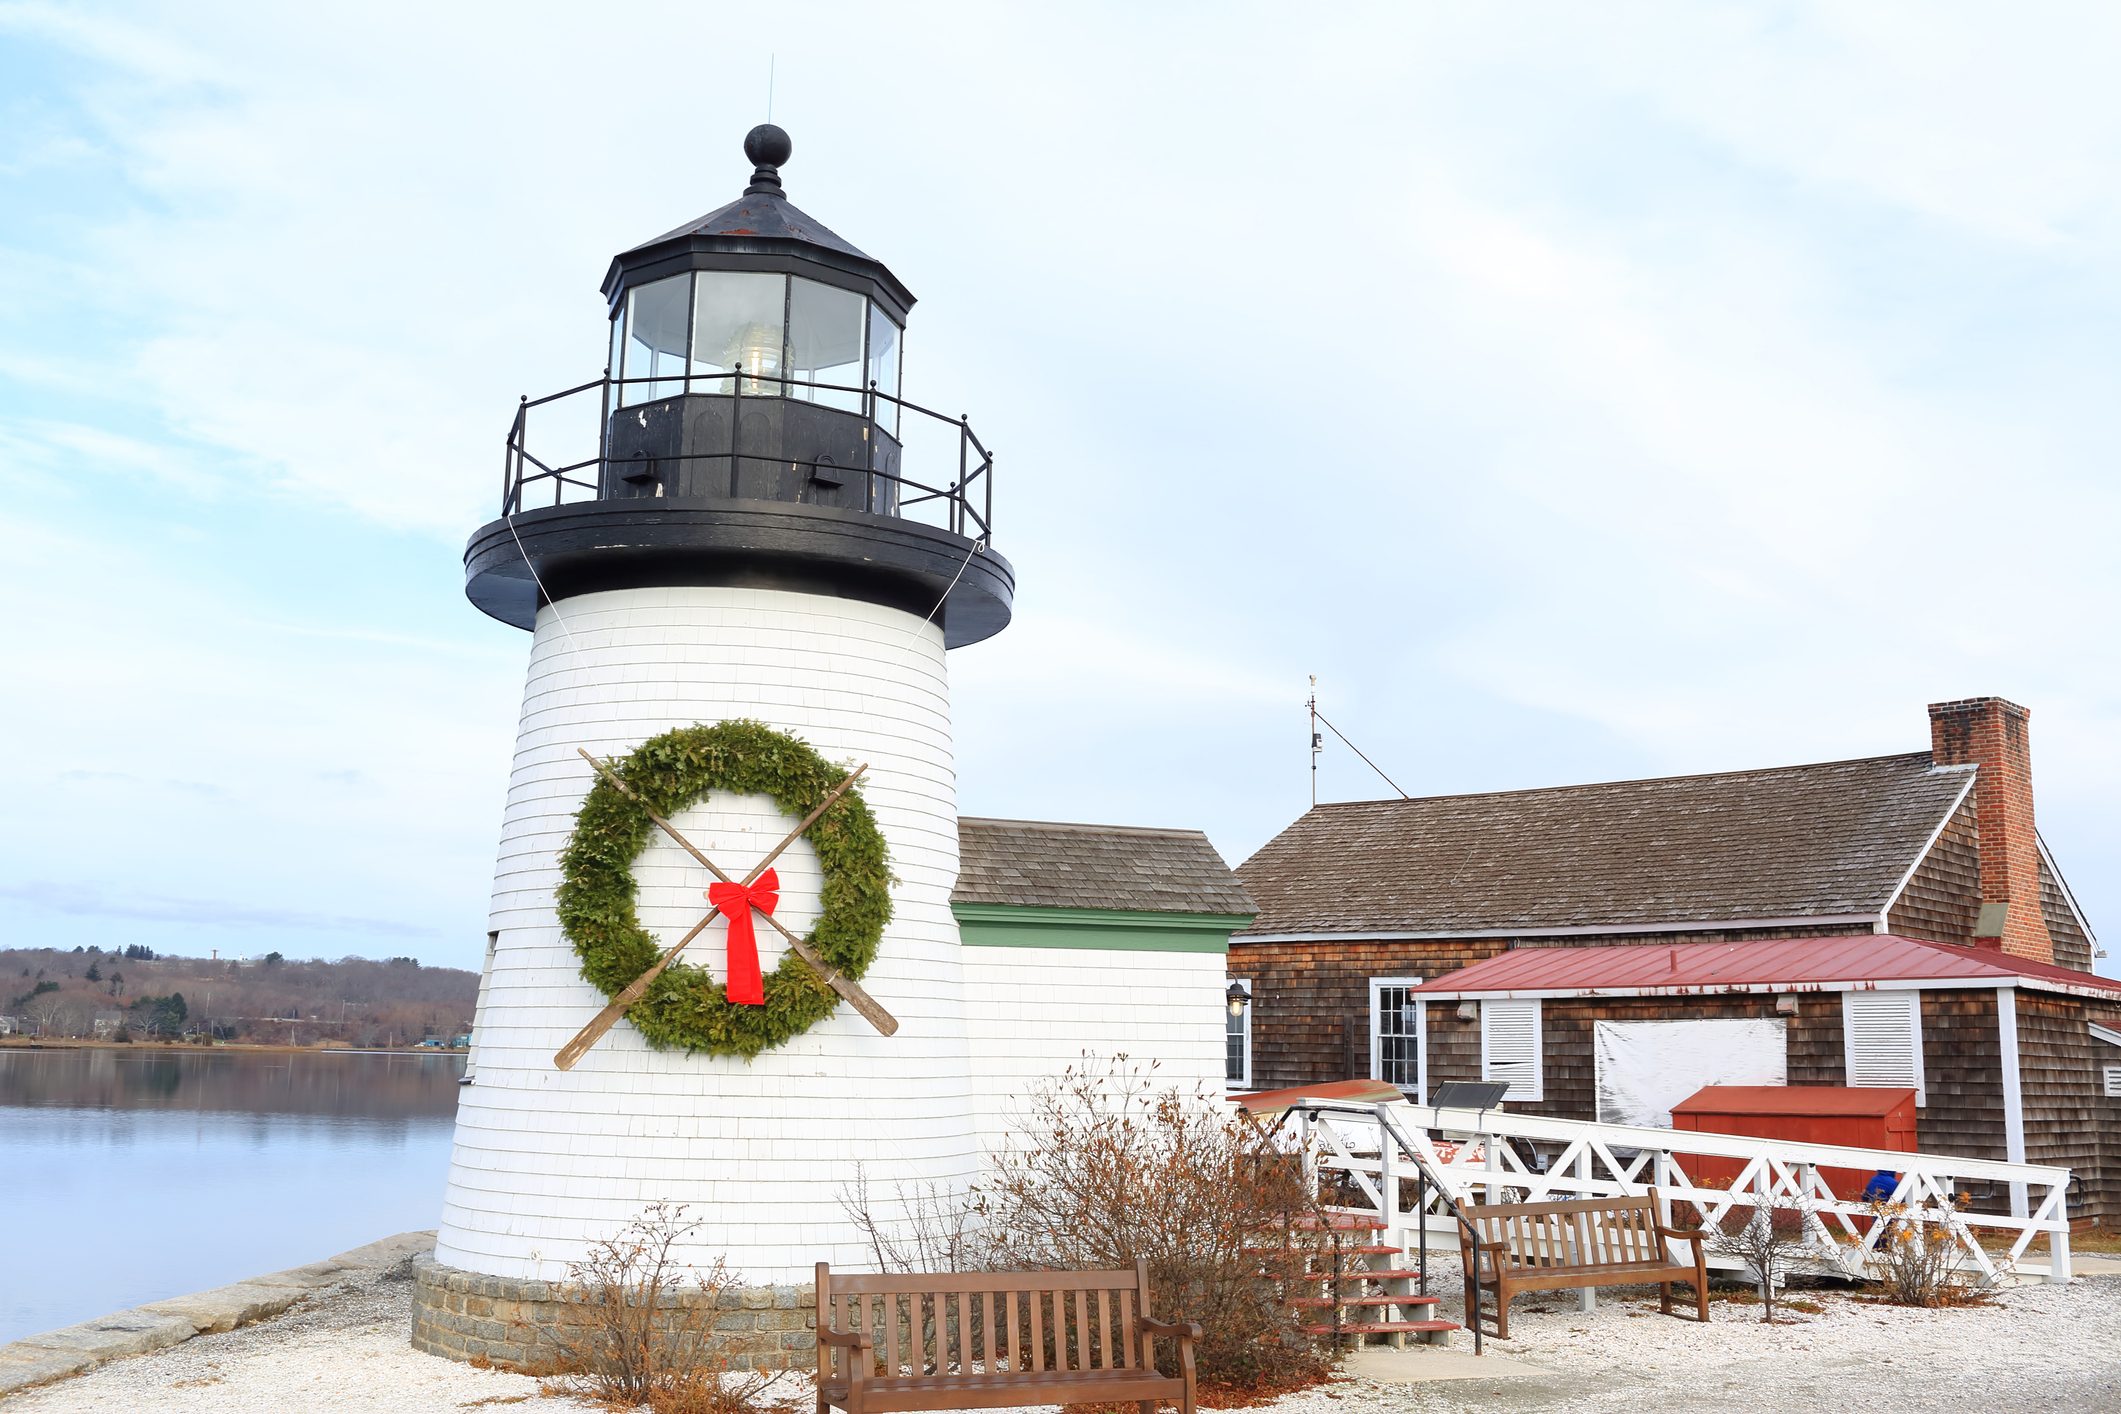 <p class=""><strong>Best for:</strong> Boat lovers</p> <p>The historic seaport of Mystic isn't just a summer destination—it's an exciting place to spend "Christmas in Connecticut" (if you didn't catch the reference, the classic flick is one of <a href="https://www.rd.com/list/romantic-christmas-movies/">the best romantic Christmas movies</a>). See the Holiday Lighted Boat Parade, in which vessels get decked out for the holidays and parade down the Mystic River. There's also a Santa Paddle, with Santas on paddle boards, and Santa arriving via tugboat. The Mystic Seaport Museum offers a "holiday bake" workshop of traditional New England treats, a community carol sing and a self-guided tour of their Lantern Light Village, where you can enjoy Christmas light displays, live holiday music, carriage rides and a visit to St. Nick. Meanwhile, the shops and restaurants of Olde Mistick Village will be decorated with more than half a million lights in the Holiday Lights Spectacular, the largest light display in southern New England.</p> <p>The family-owned—and family-friendly—<a href="https://www.tripadvisor.com/Hotel_Review-g33845-d254956-Reviews-Taber_Inn_And_Suites-Mystic_Mystic_Country_Connecticut.html" rel="noopener">Taber Inn and Suites</a> stands out among the many B&Bs and inns of Mystic. Set in 12 buildings over two acres, the inn is conveniently located near all the village's attractions and features the only indoor pool in downtown Mystic.</p> <p class="listicle-page__cta-button-shop"><a class="shop-btn" href="https://www.tripadvisor.com/Hotel_Review-g33845-d254956-Reviews-Taber_Inn_And_Suites-Mystic_Mystic_Country_Connecticut.html">Book Now</a></p>